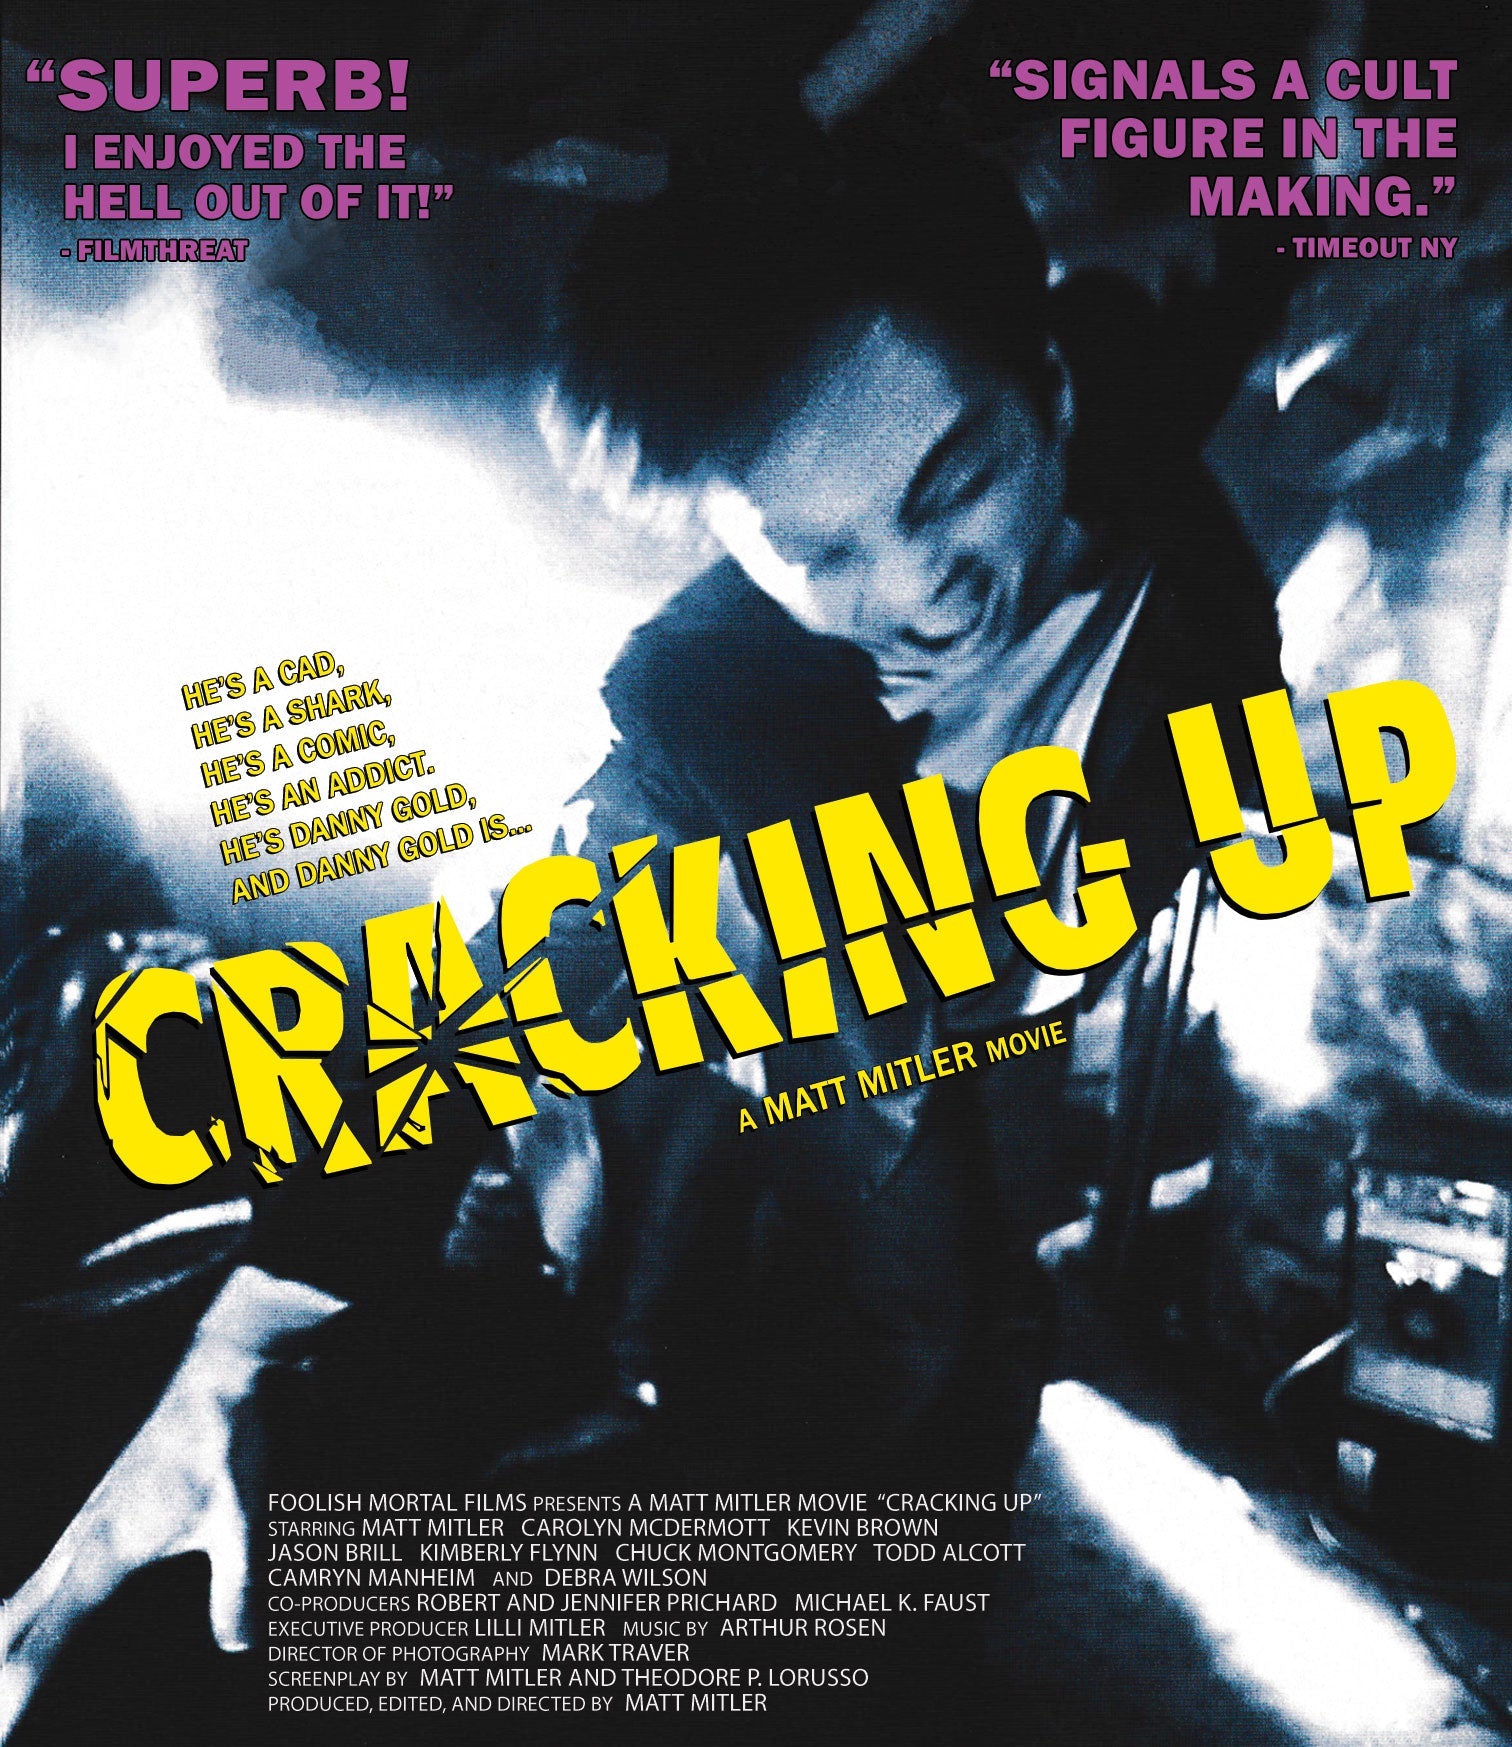 CRACKING UP (LIMITED EDITION) BLU-RAY